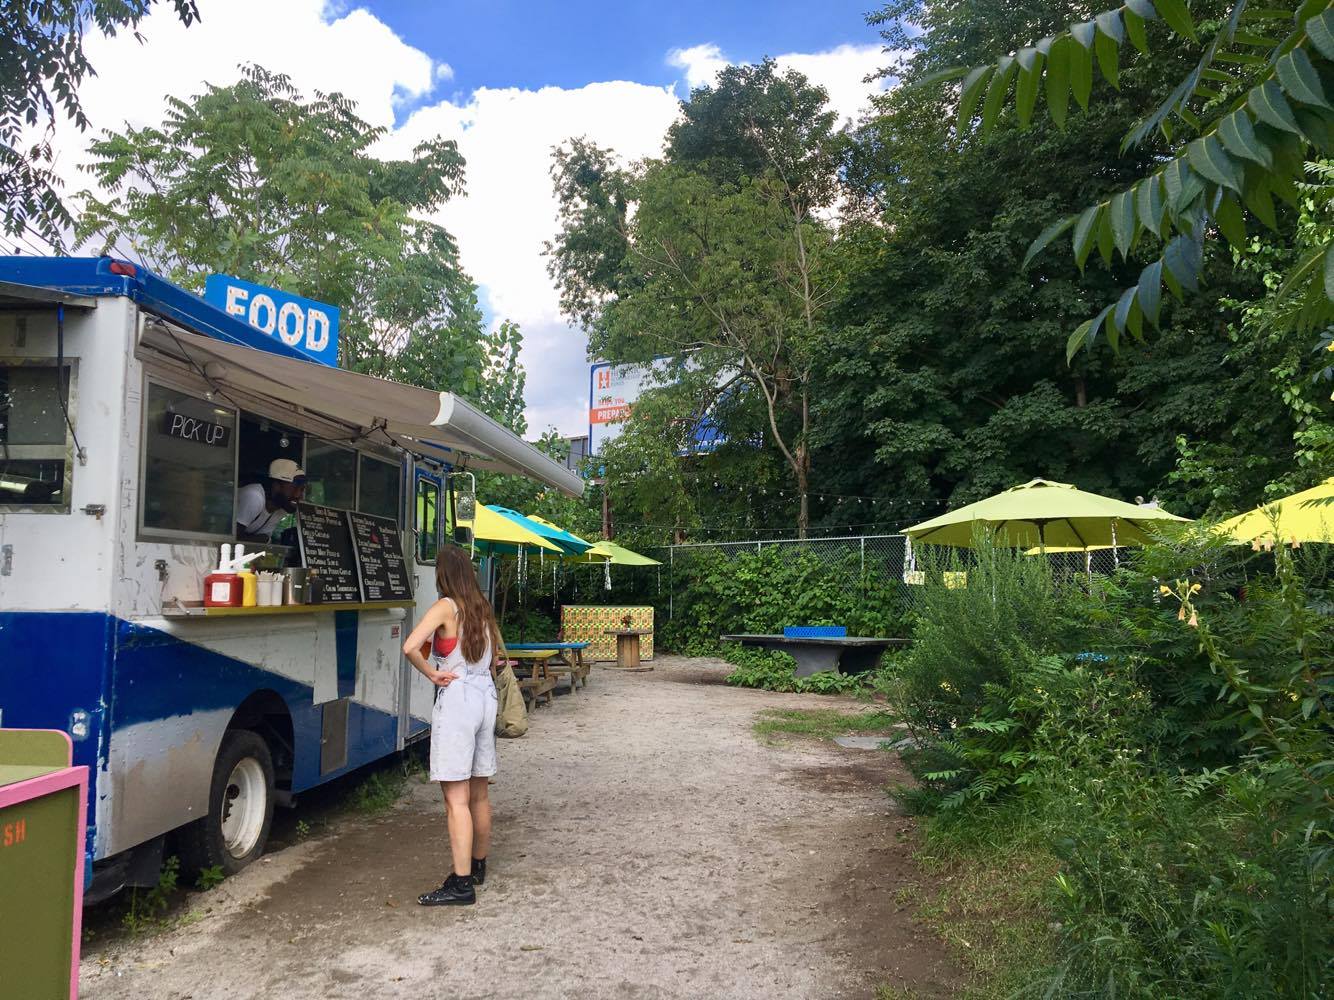 Food truck at Nowadays in Brooklyn, NY